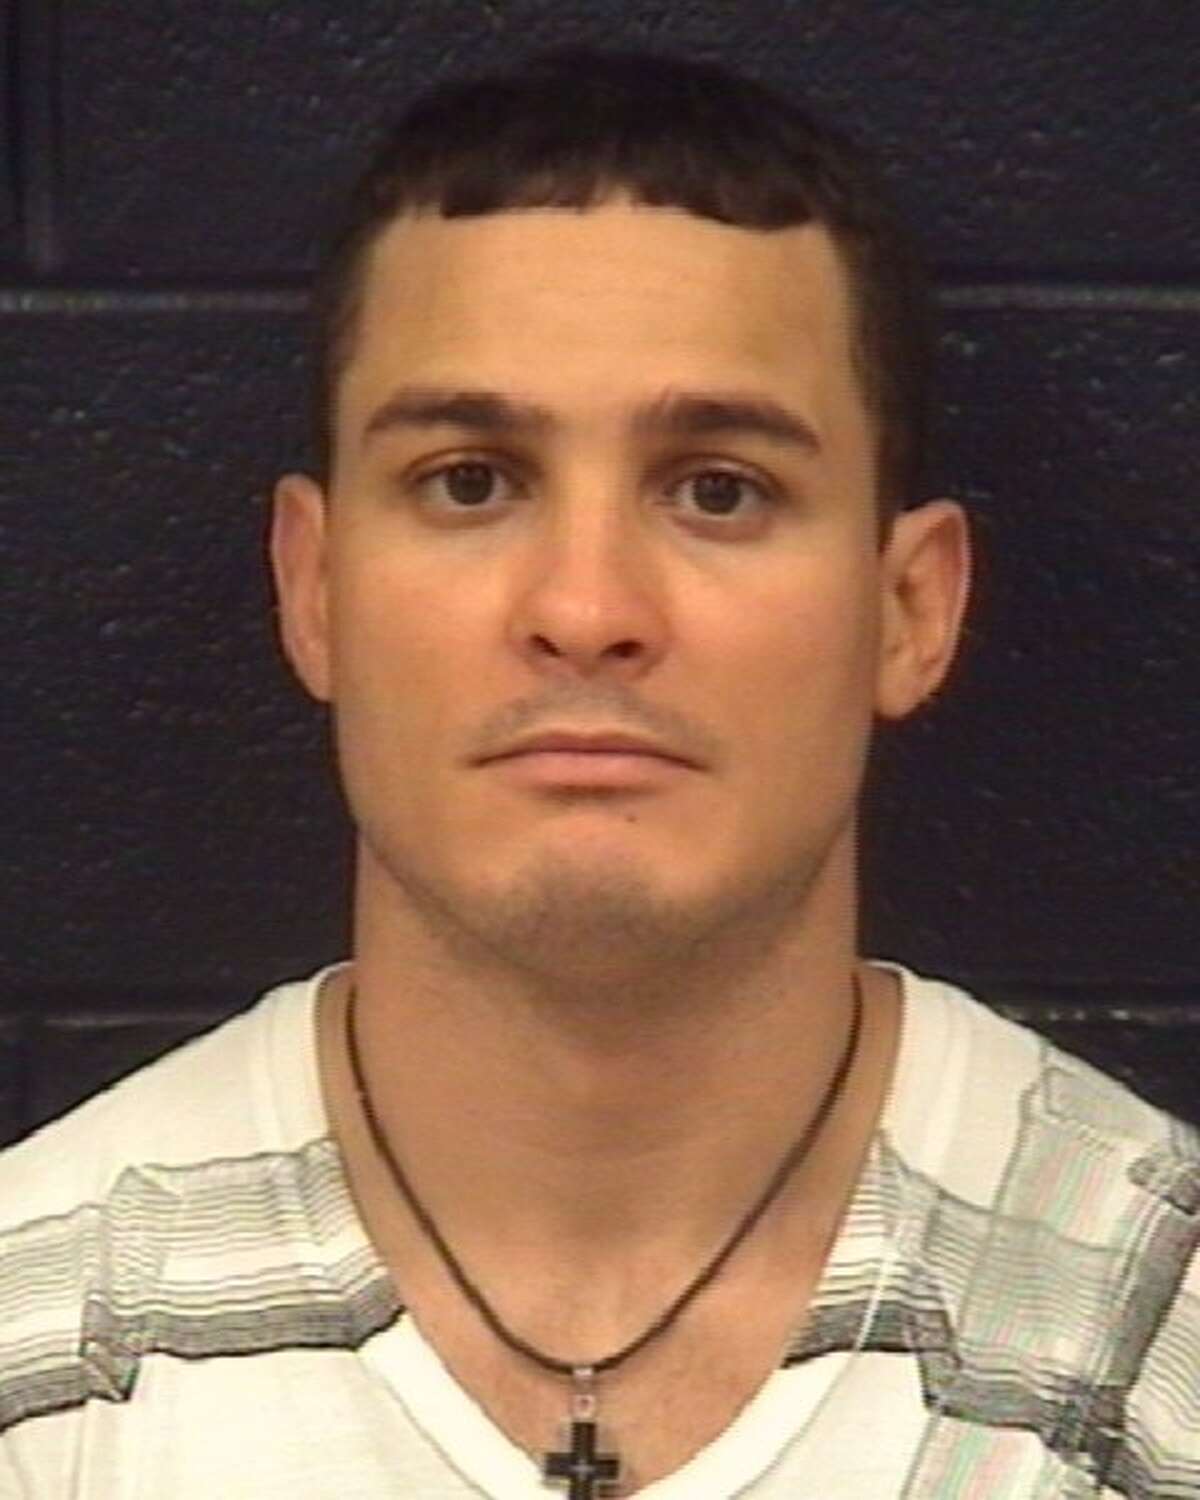 Andy Ibazetta Gomez, 36, is wanted for driving a vehicle that did not belong to him, according to Laredo police.